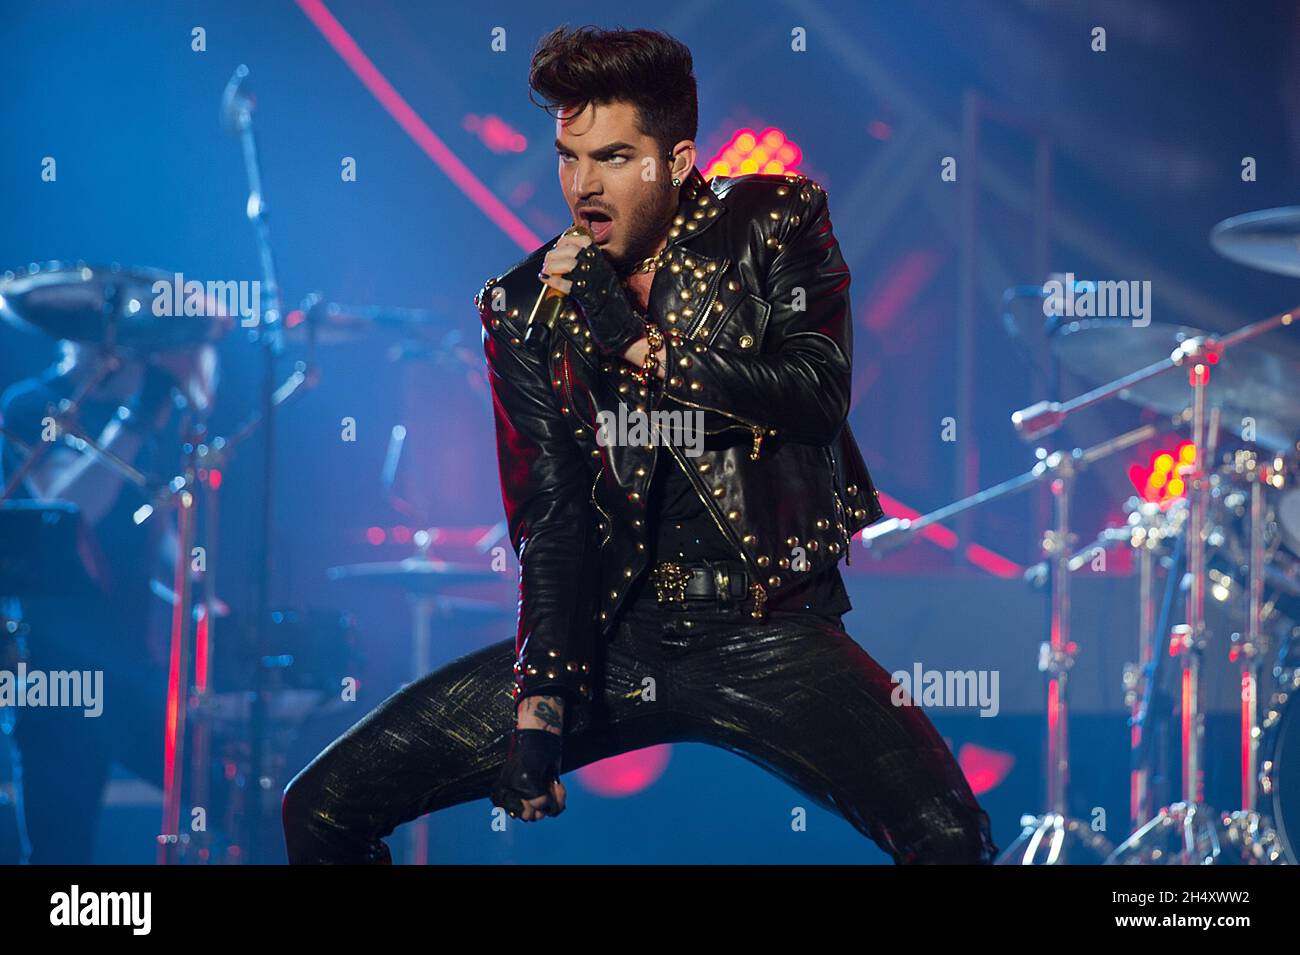 Adam Lambert live on stage at the Barclaycard Arena on January 23, 2015 in Birmingham, England. Stock Photo